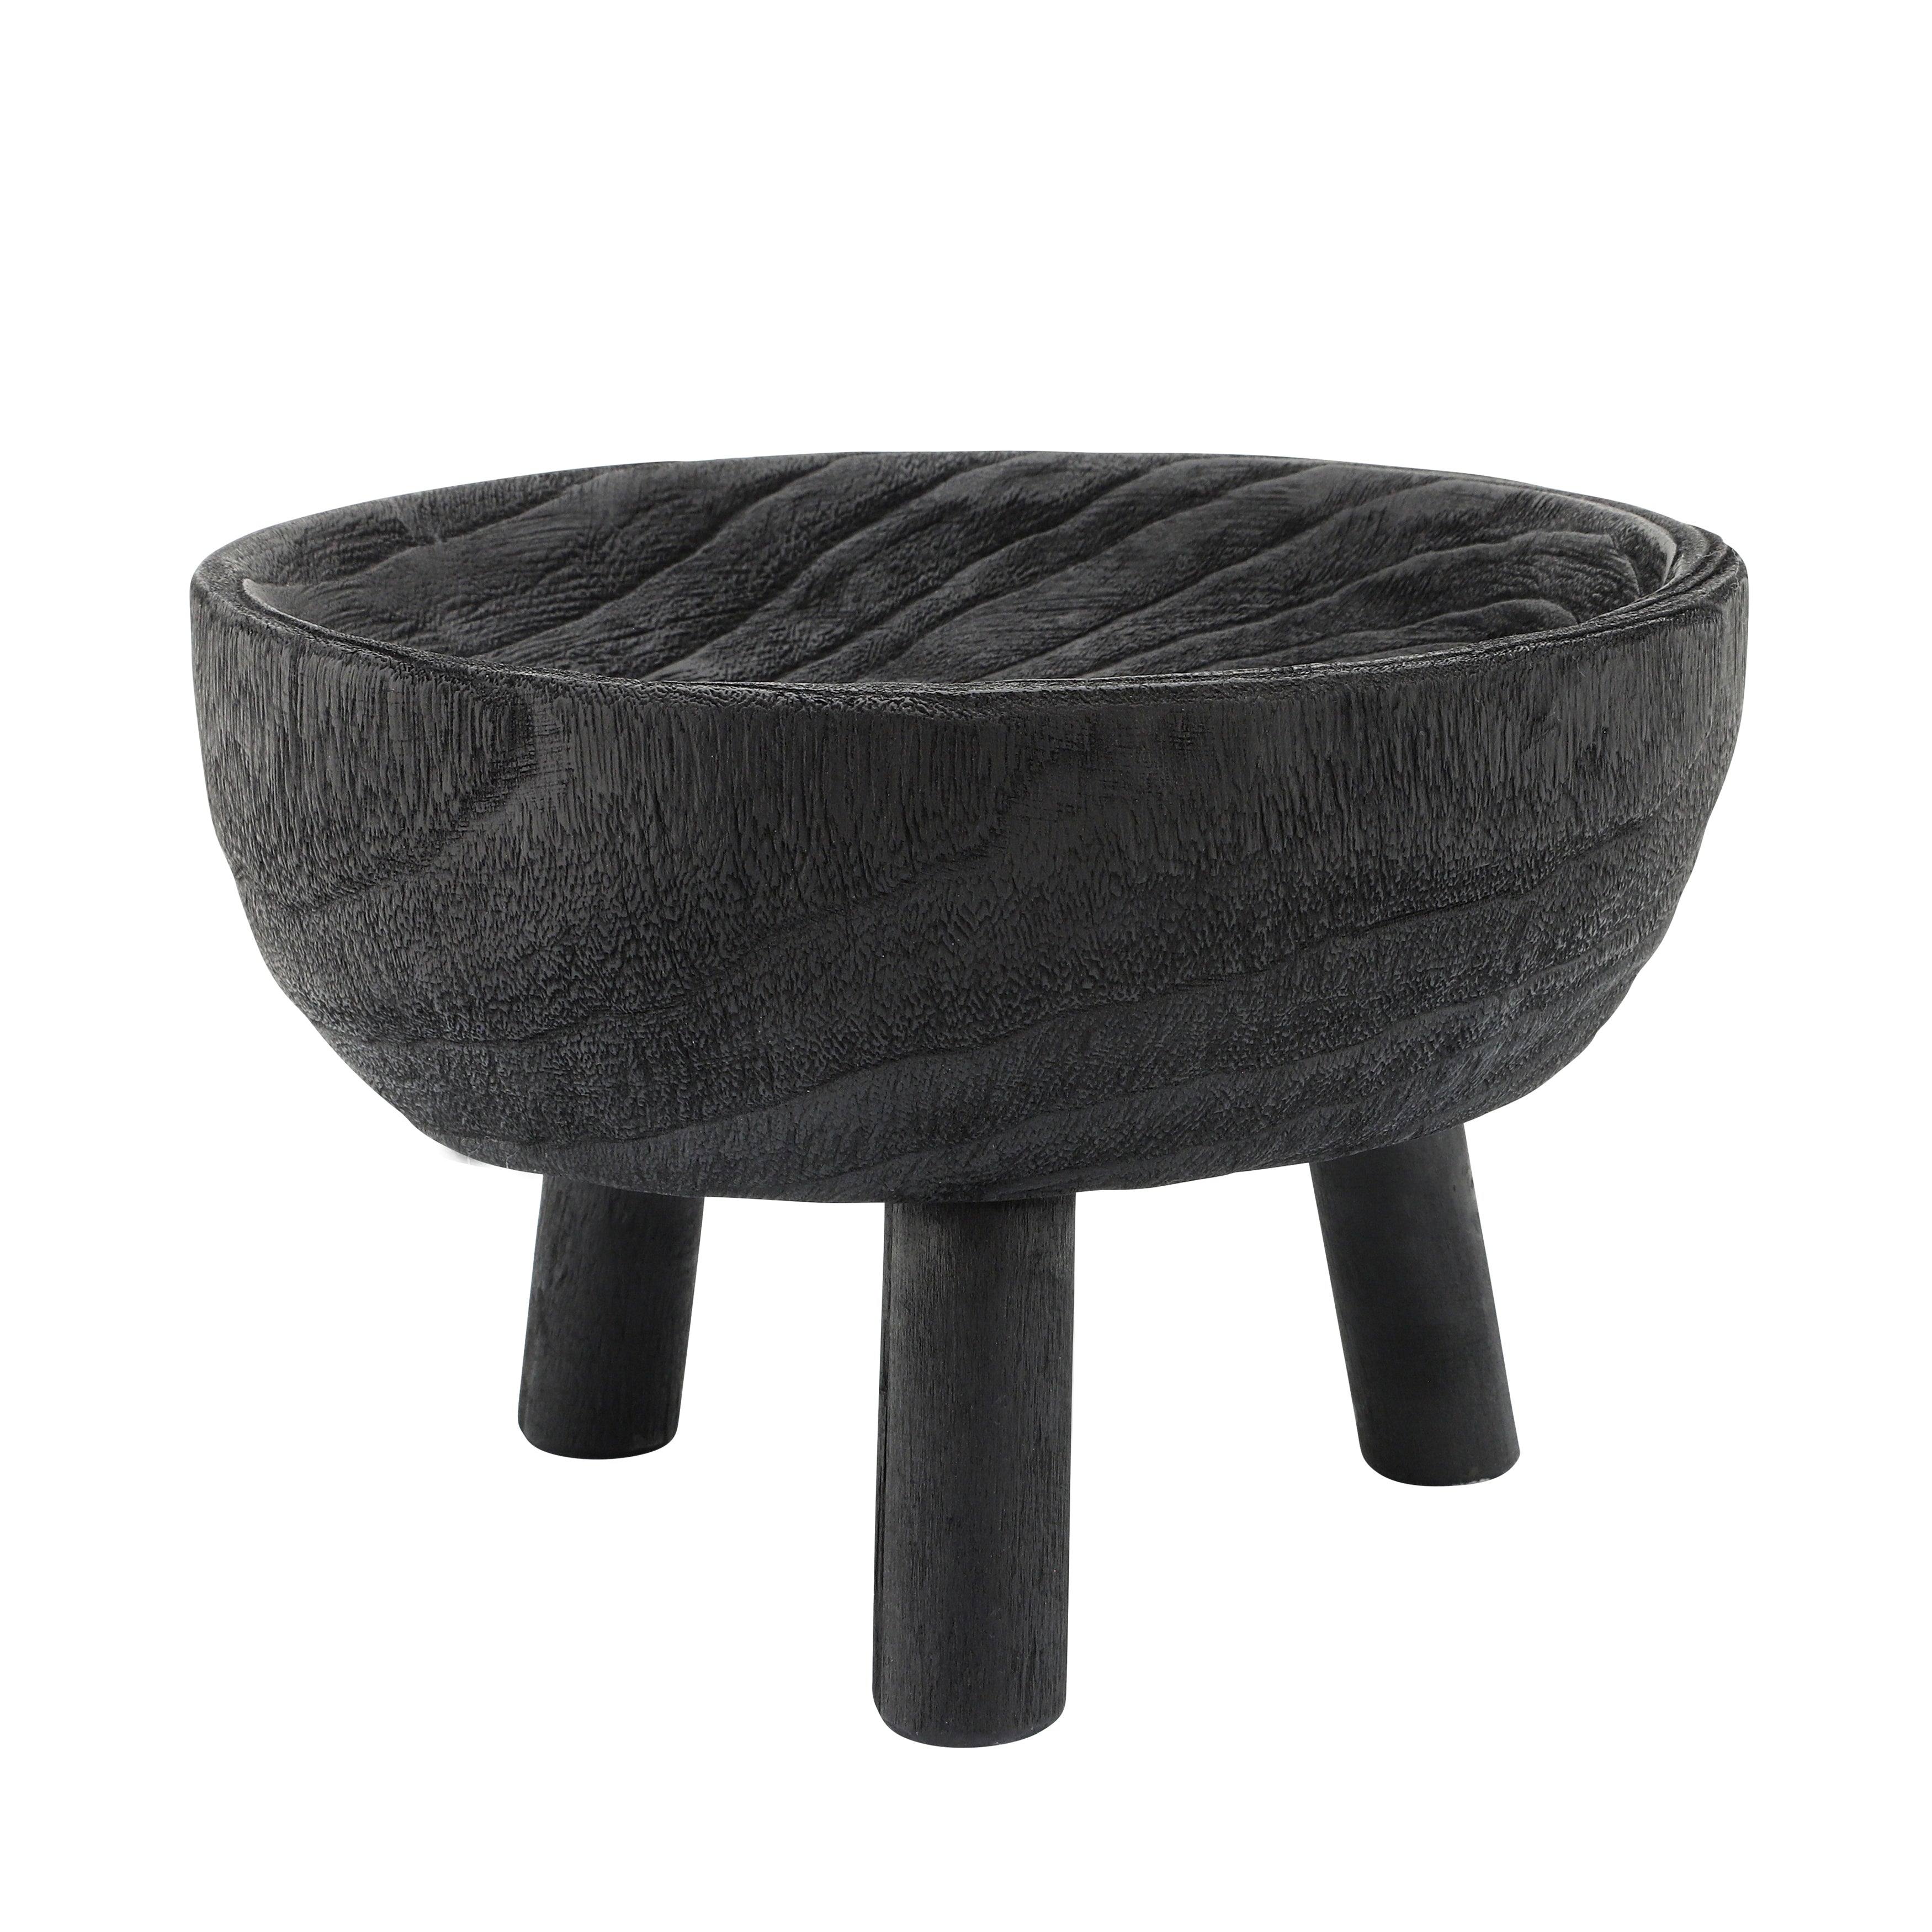 Wood Bowl With Legs - Black